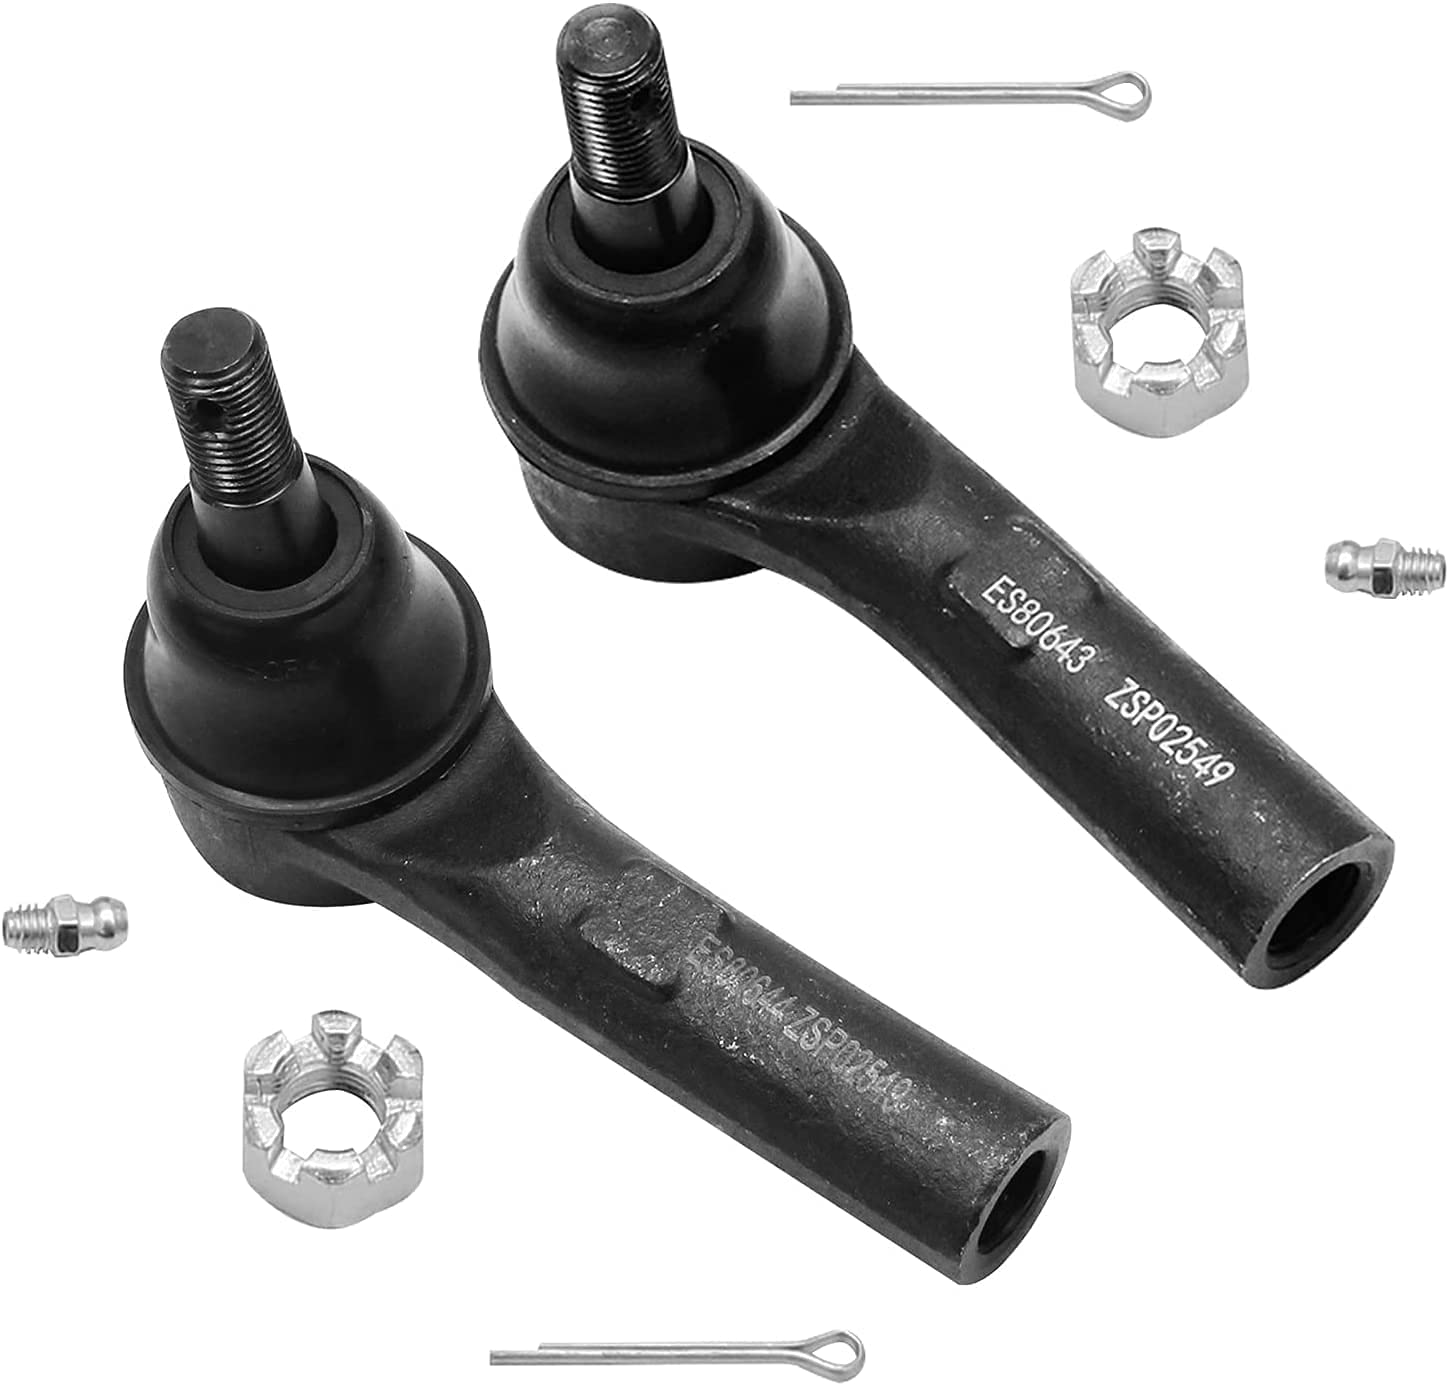 Detroit Axle Front 12pc Suspension Kit for Jeep Grand Cherokee Commander  2005 2006 2007 2008 2009 2010, Upper Control Arms Lower Ball Joints Sway  Bars Tie Rods Boots Replacement